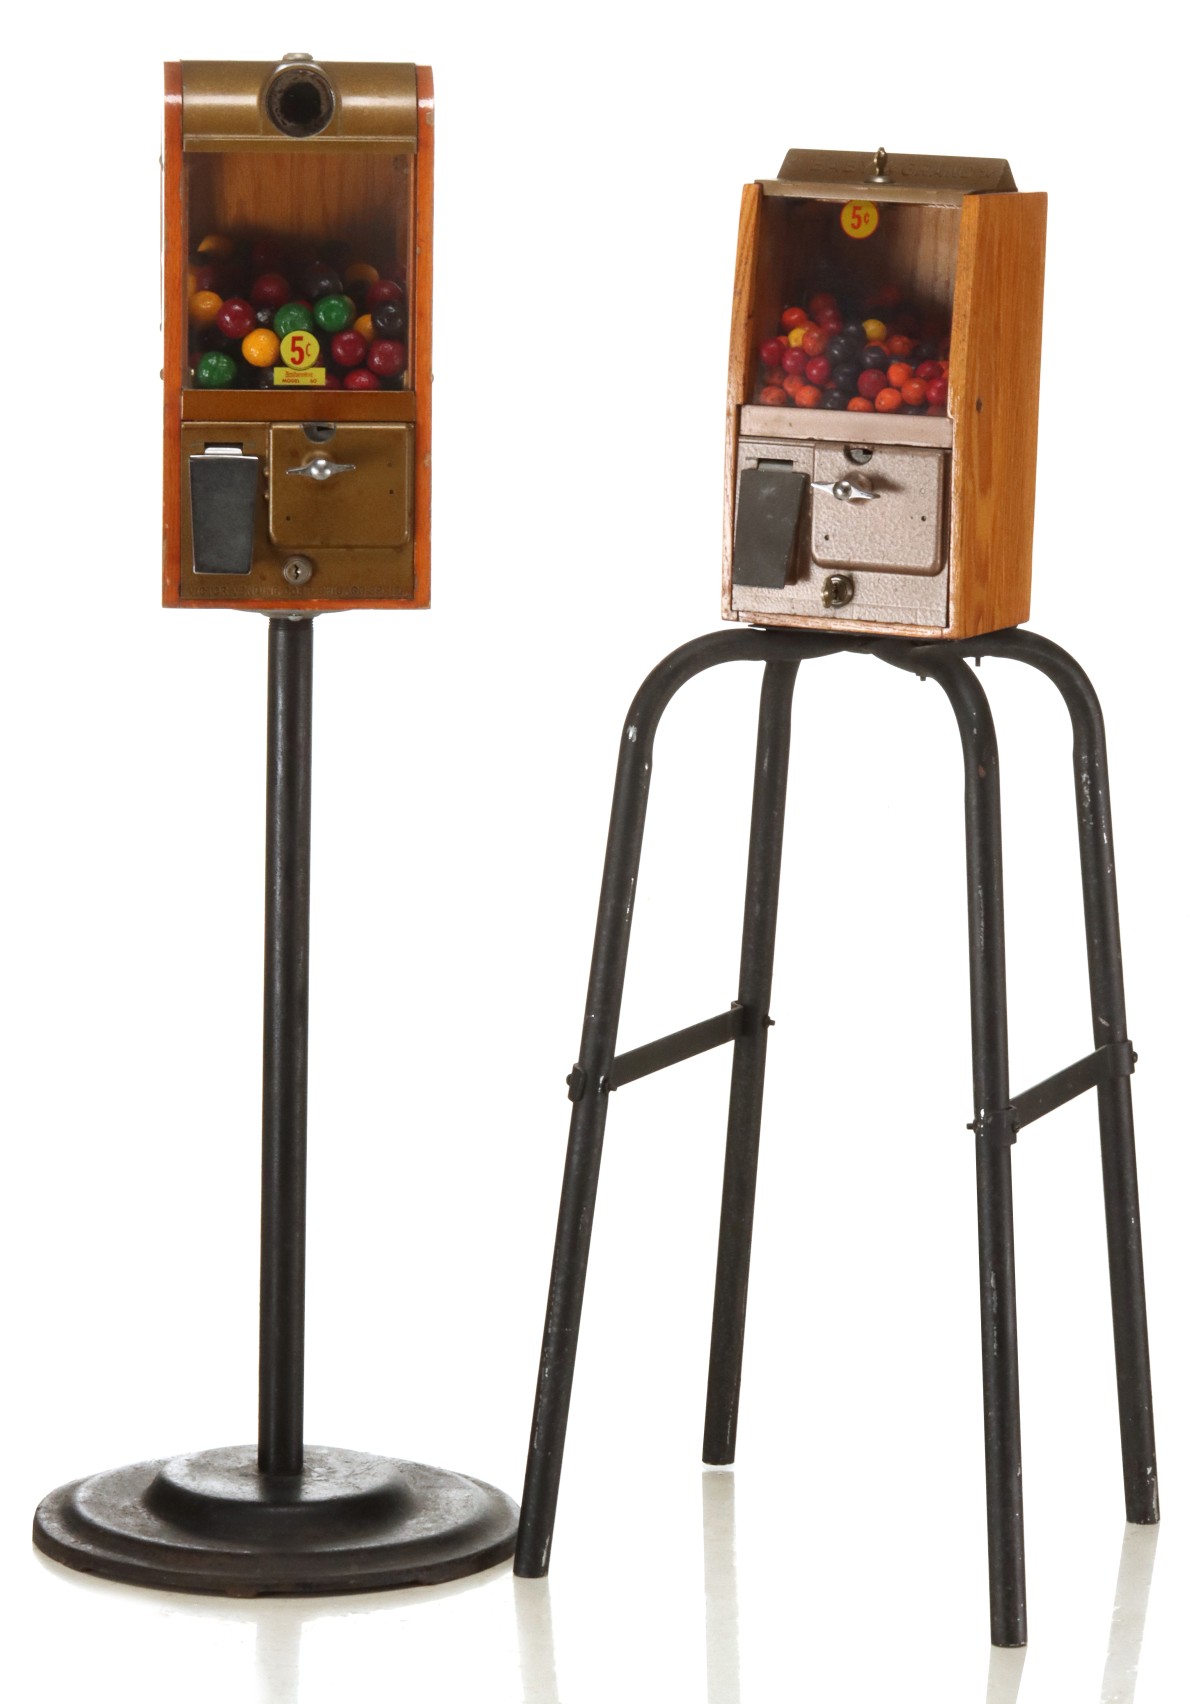 TWO VICTOR 'BABY GRAND' OAK CASE GUMBALL MACHINES